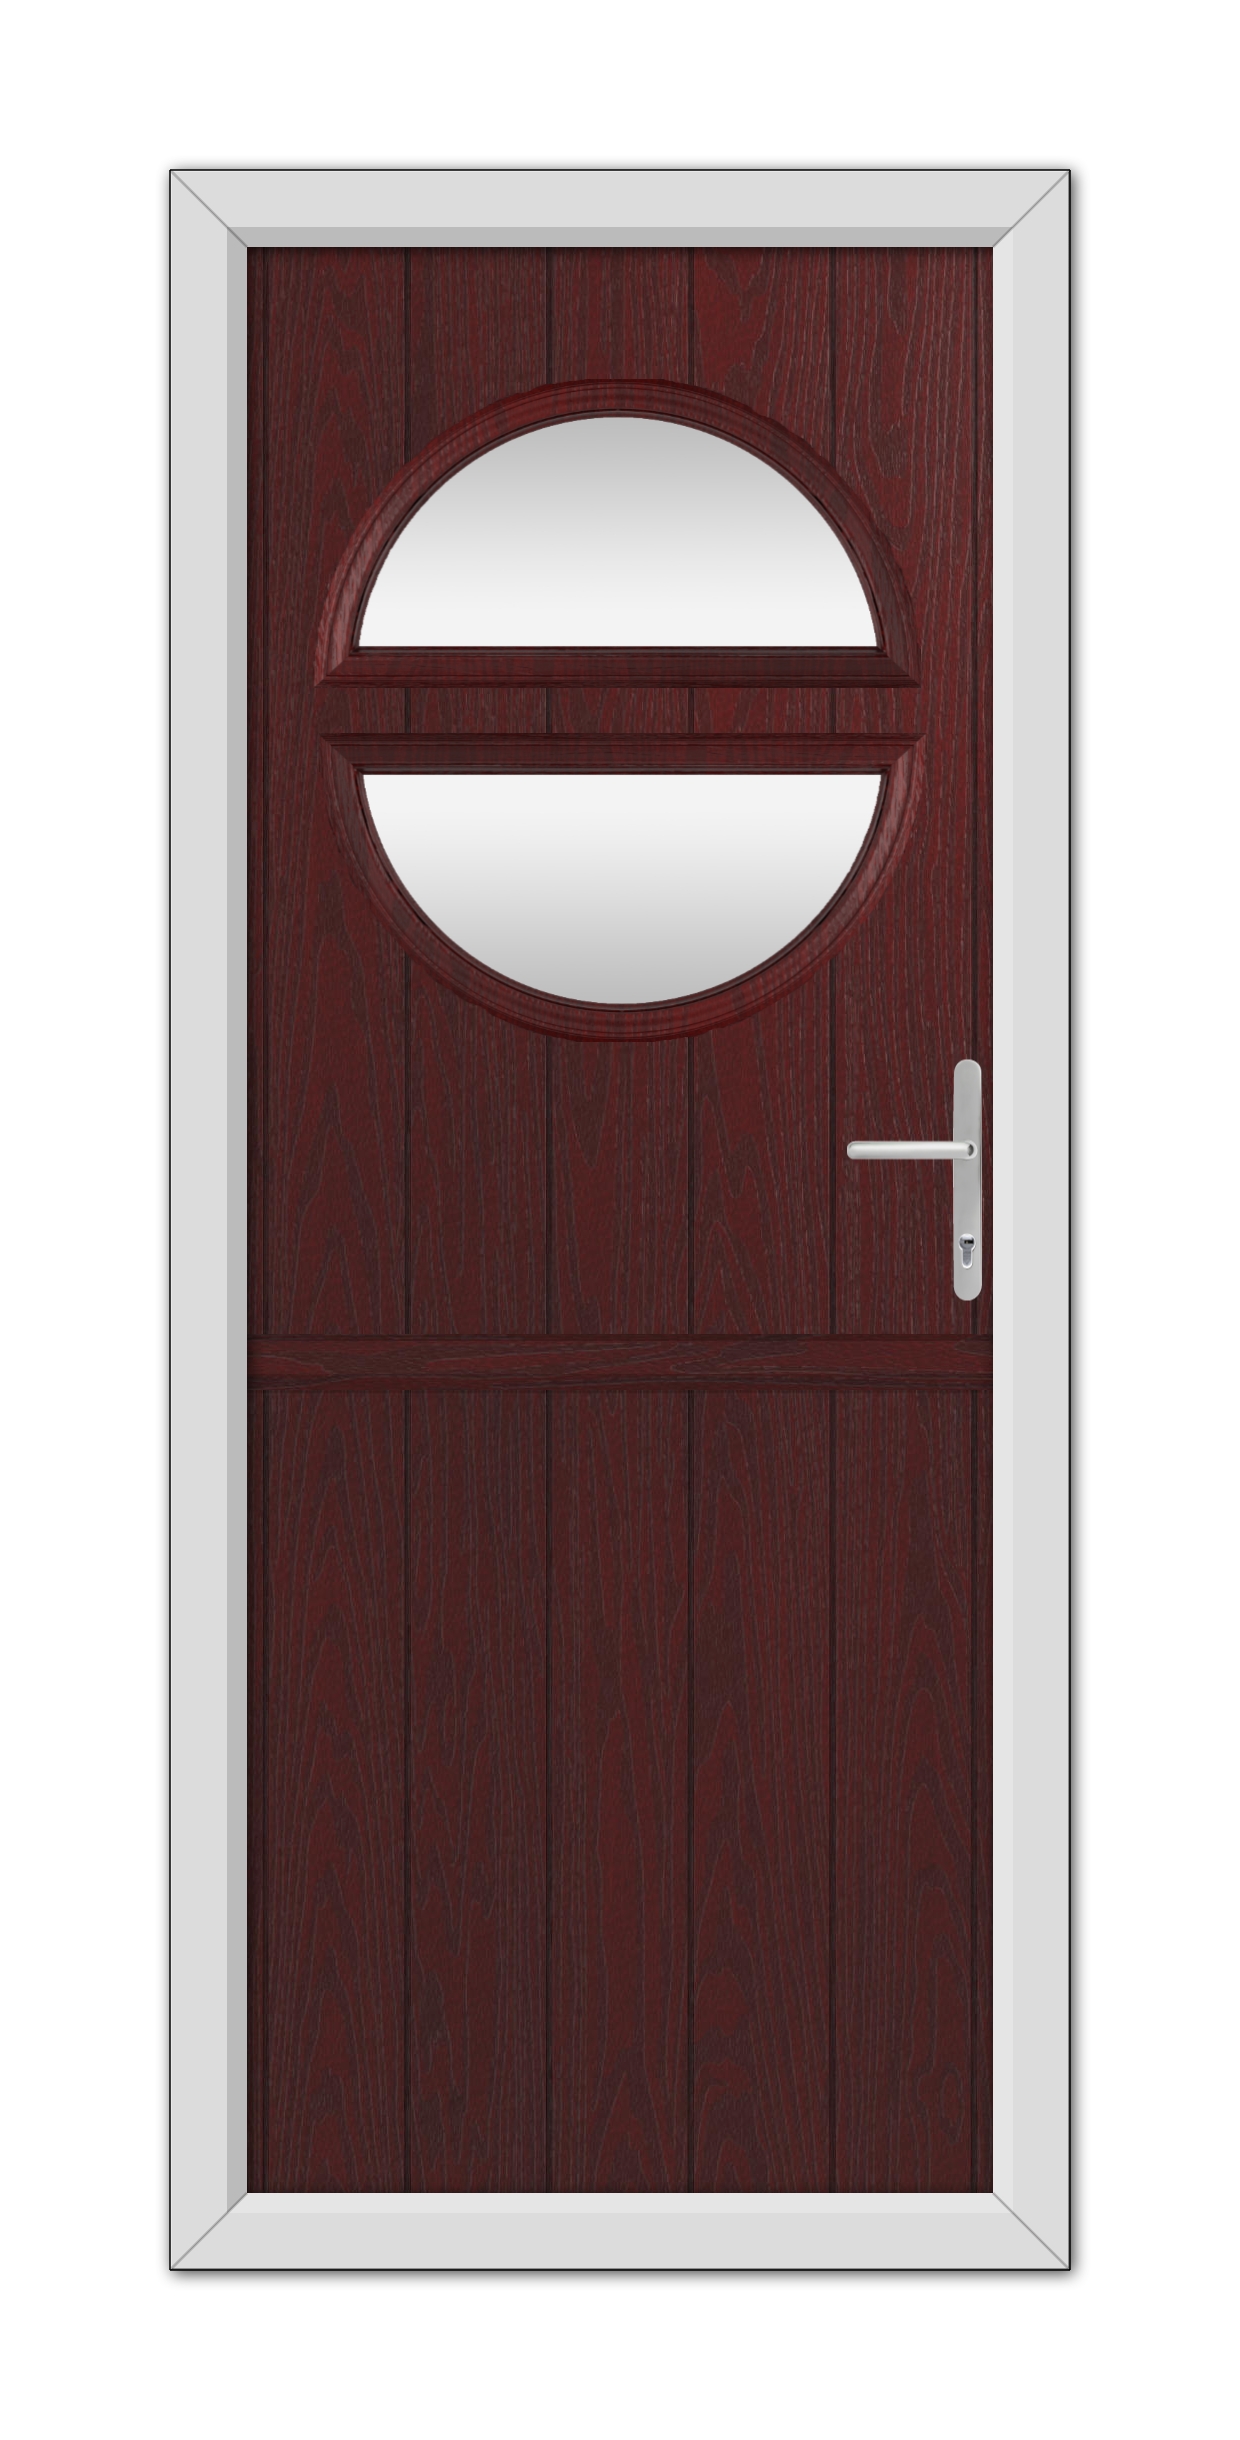 A modern Rosewood Kent Stable Composite Door 48mm Timber Core with an oval glass window at the top and a silver handle, set within a white frame.